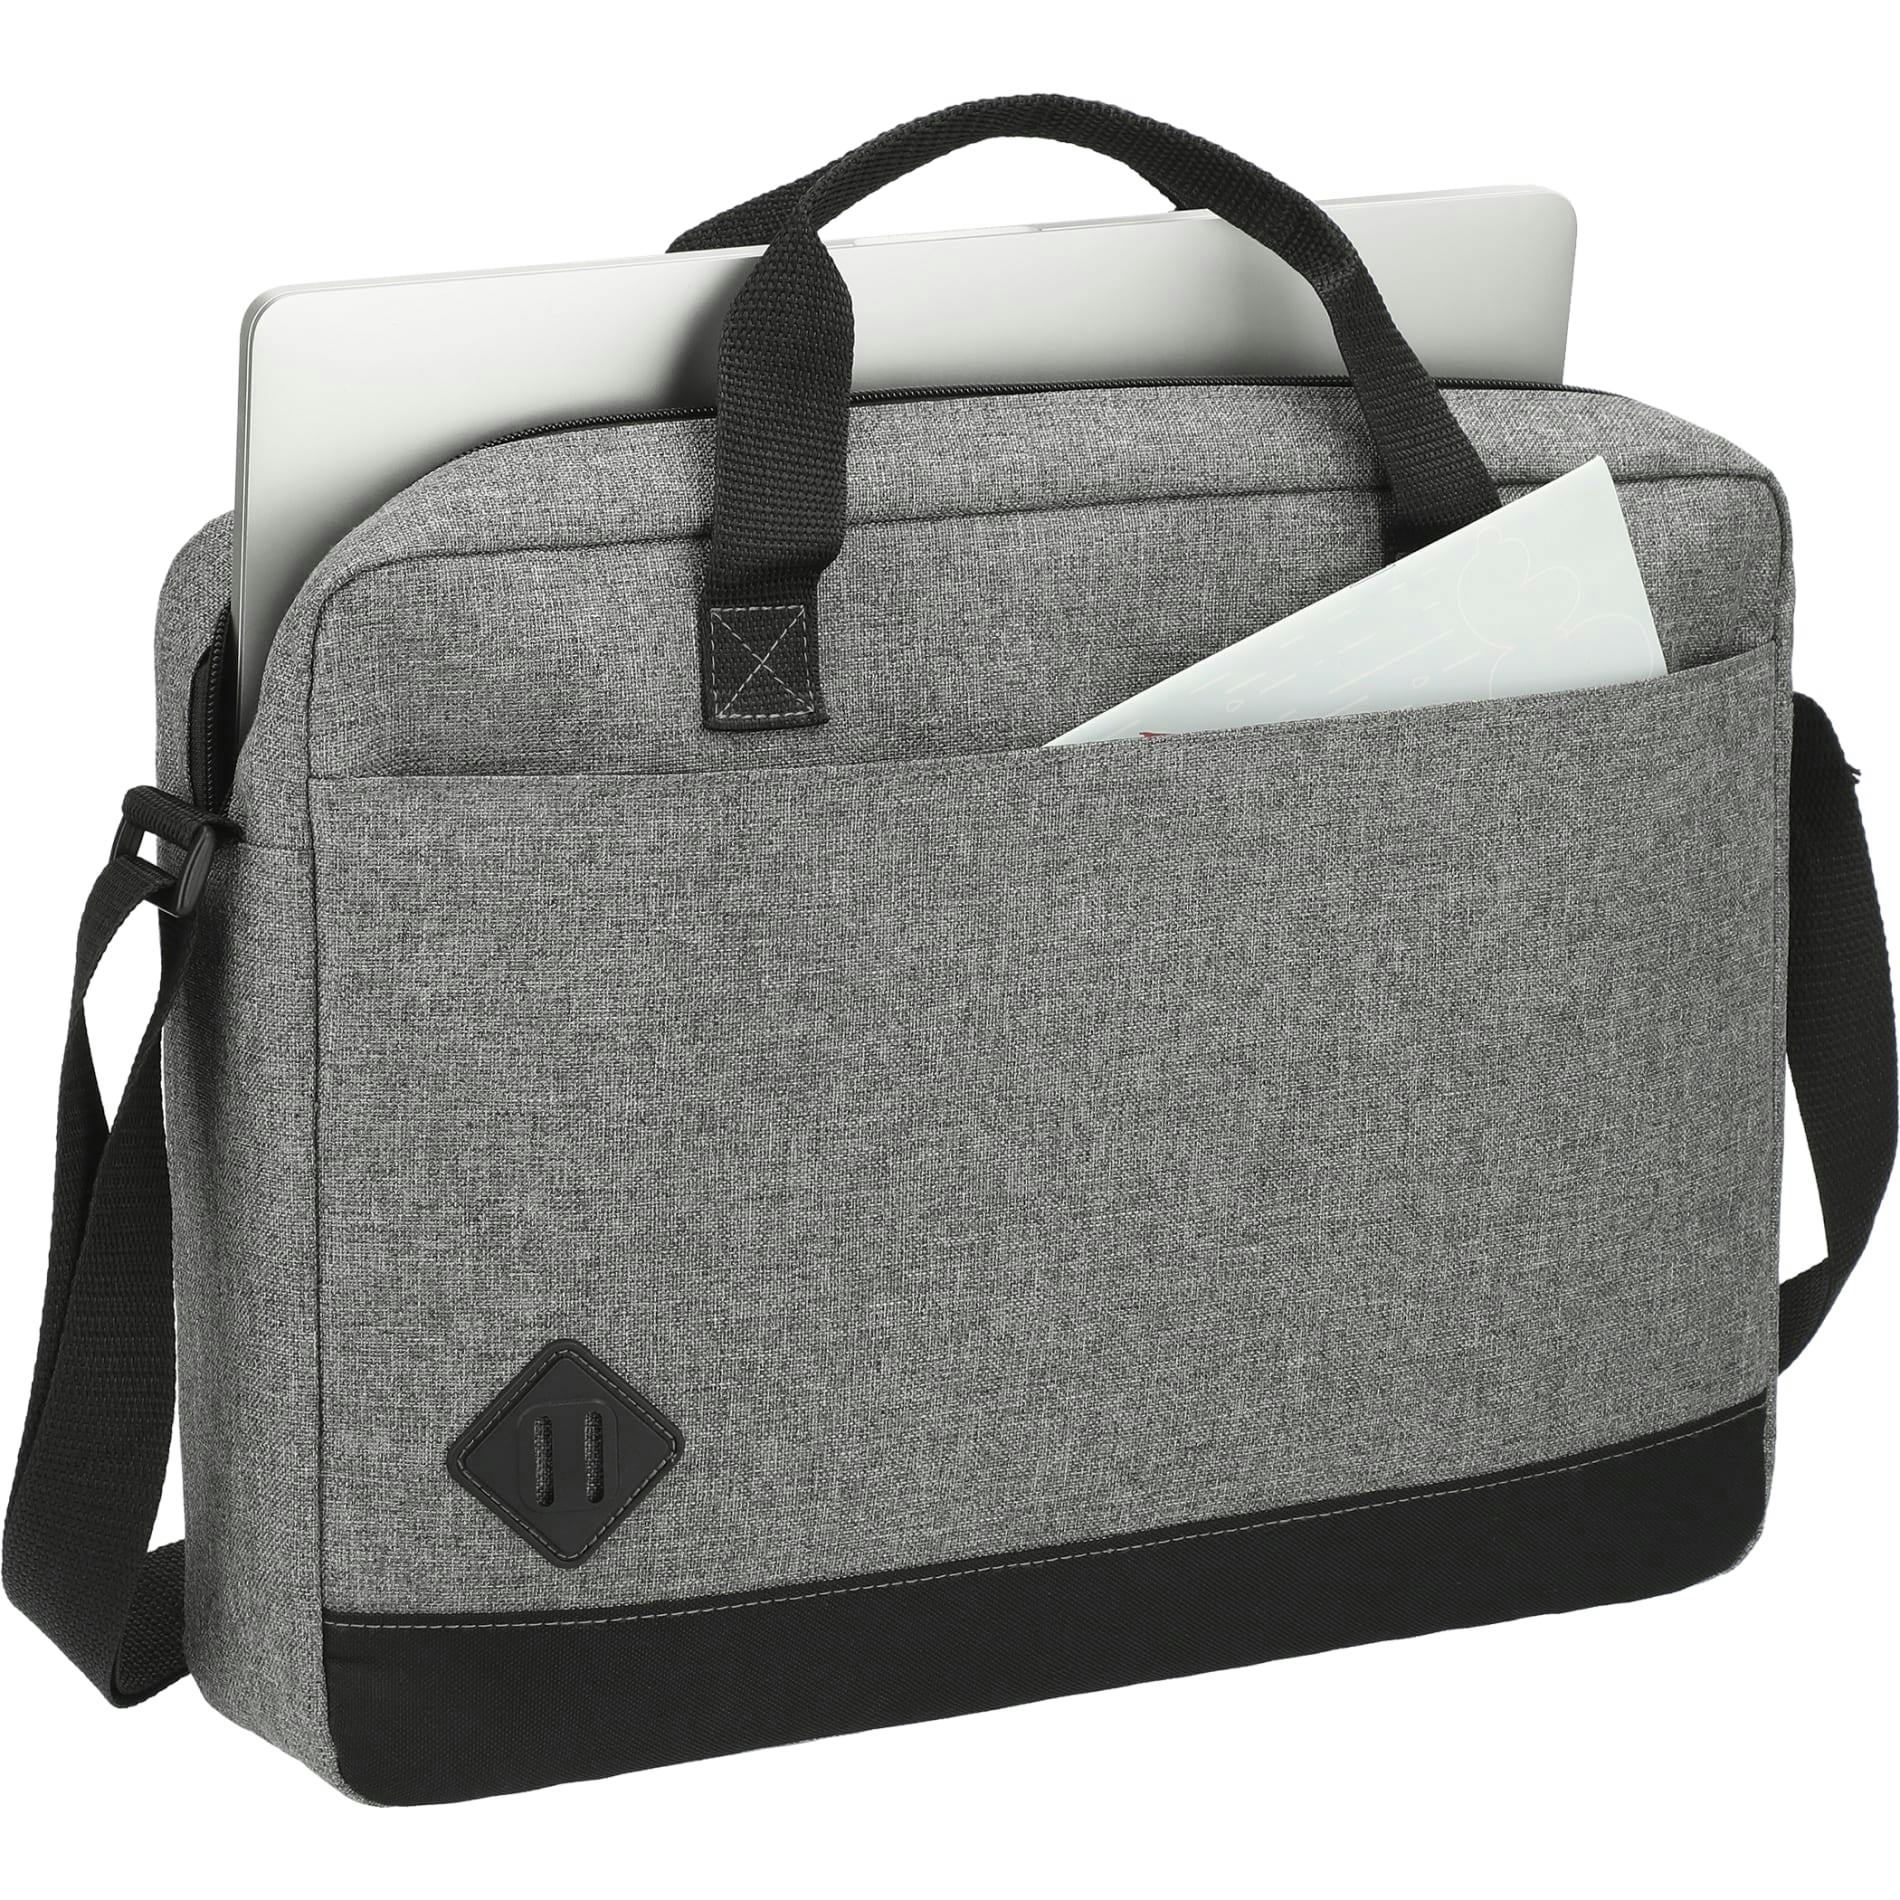 Graphite Dome 15" Computer Business Case - additional Image 1